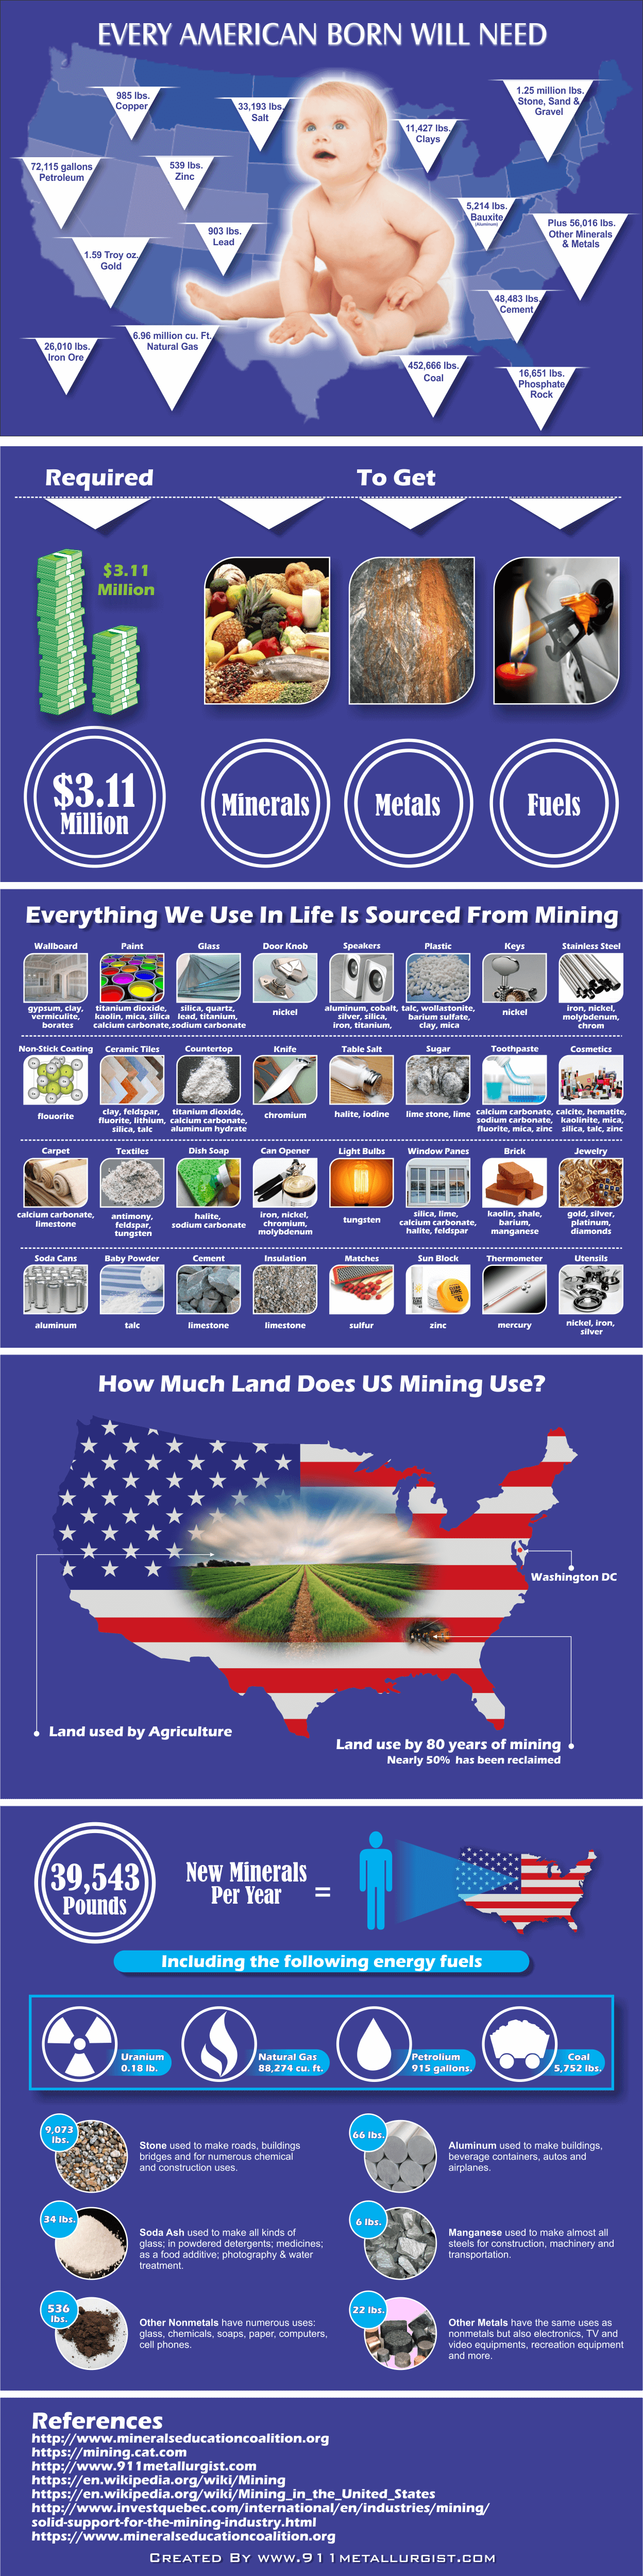 Why do we need mining & metals